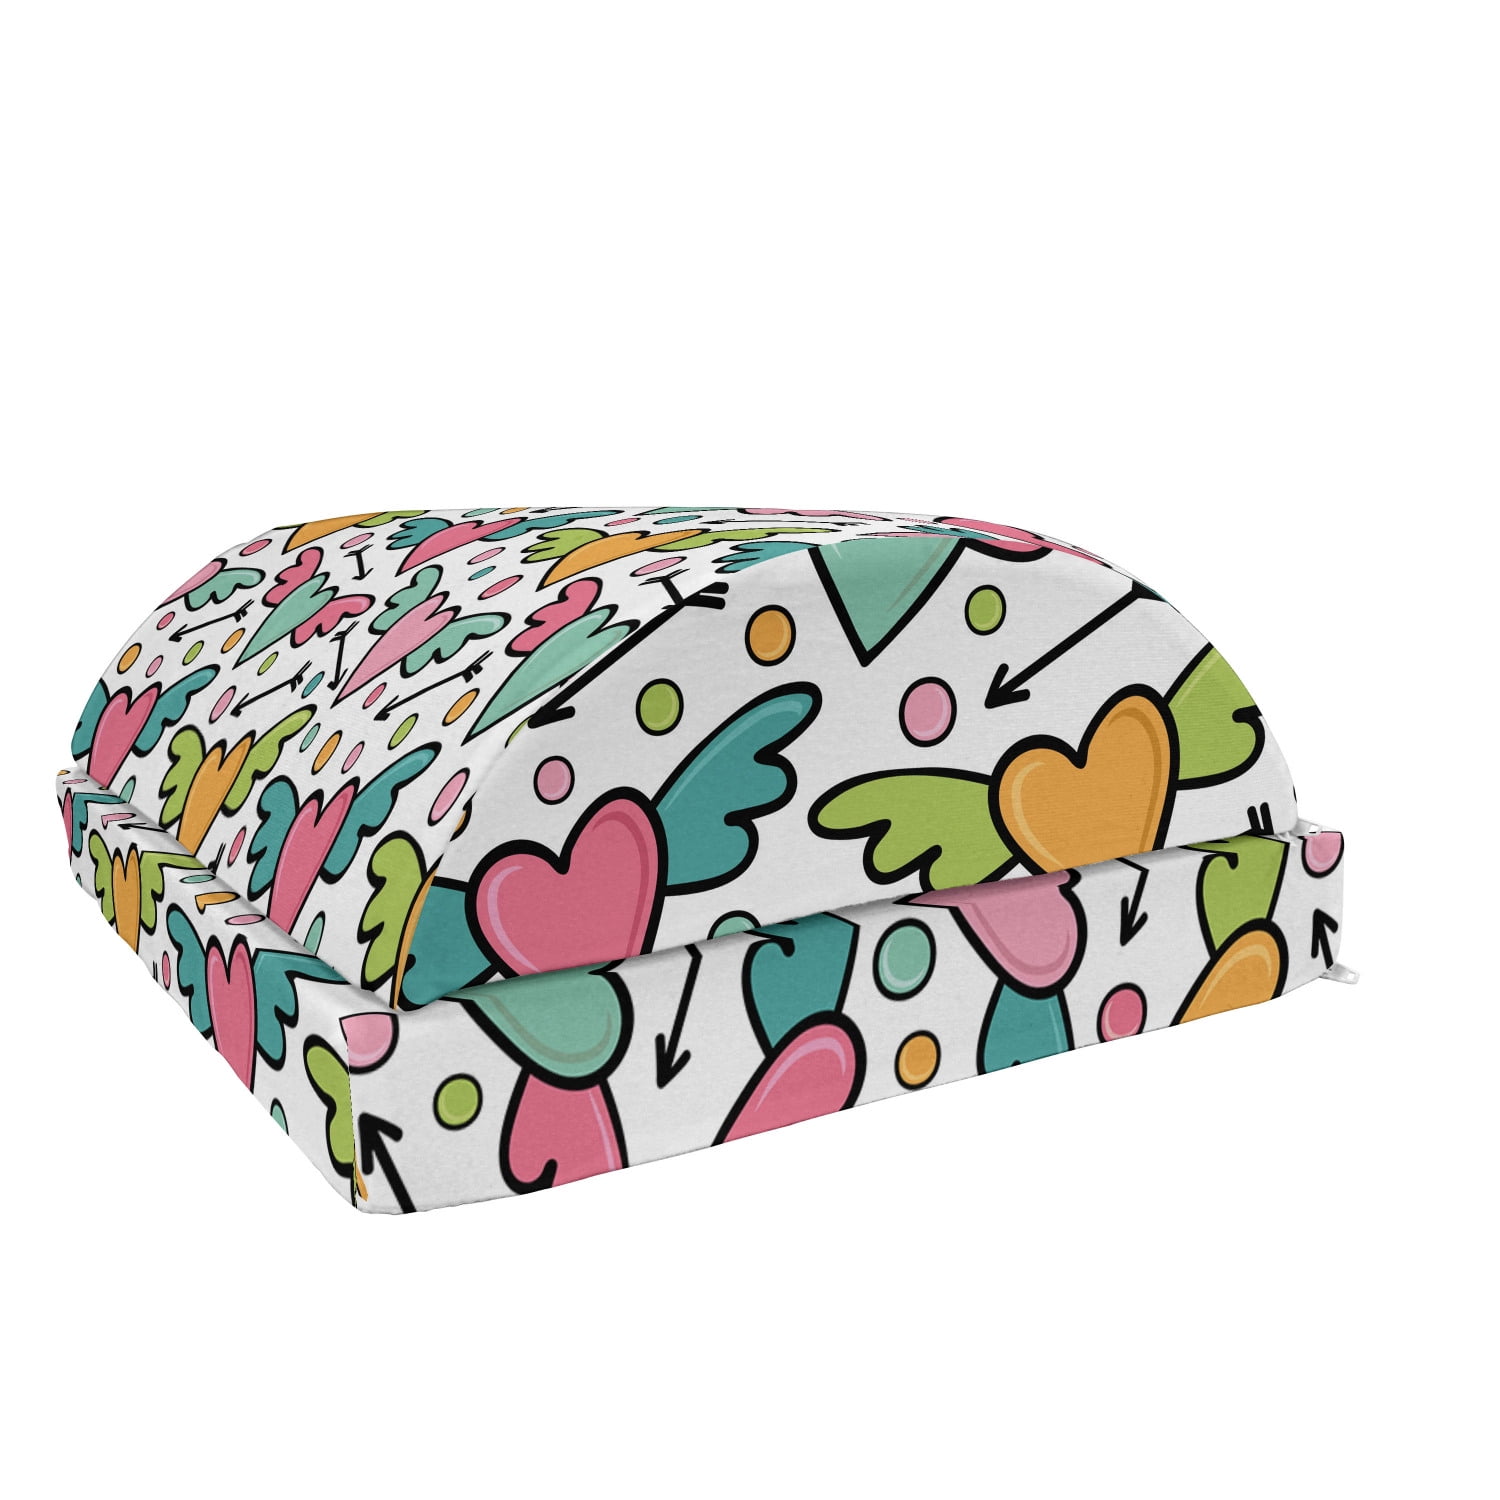  Ambesonne Kawaii Foot Rest, Pattern with Doodles Cartoon Funny  Characters Little Hearts, Non-Slip Backing Adjustable Ergonomic Memory Foam  Leg Support for Office, Pale Blue Pink Beige : Office Products